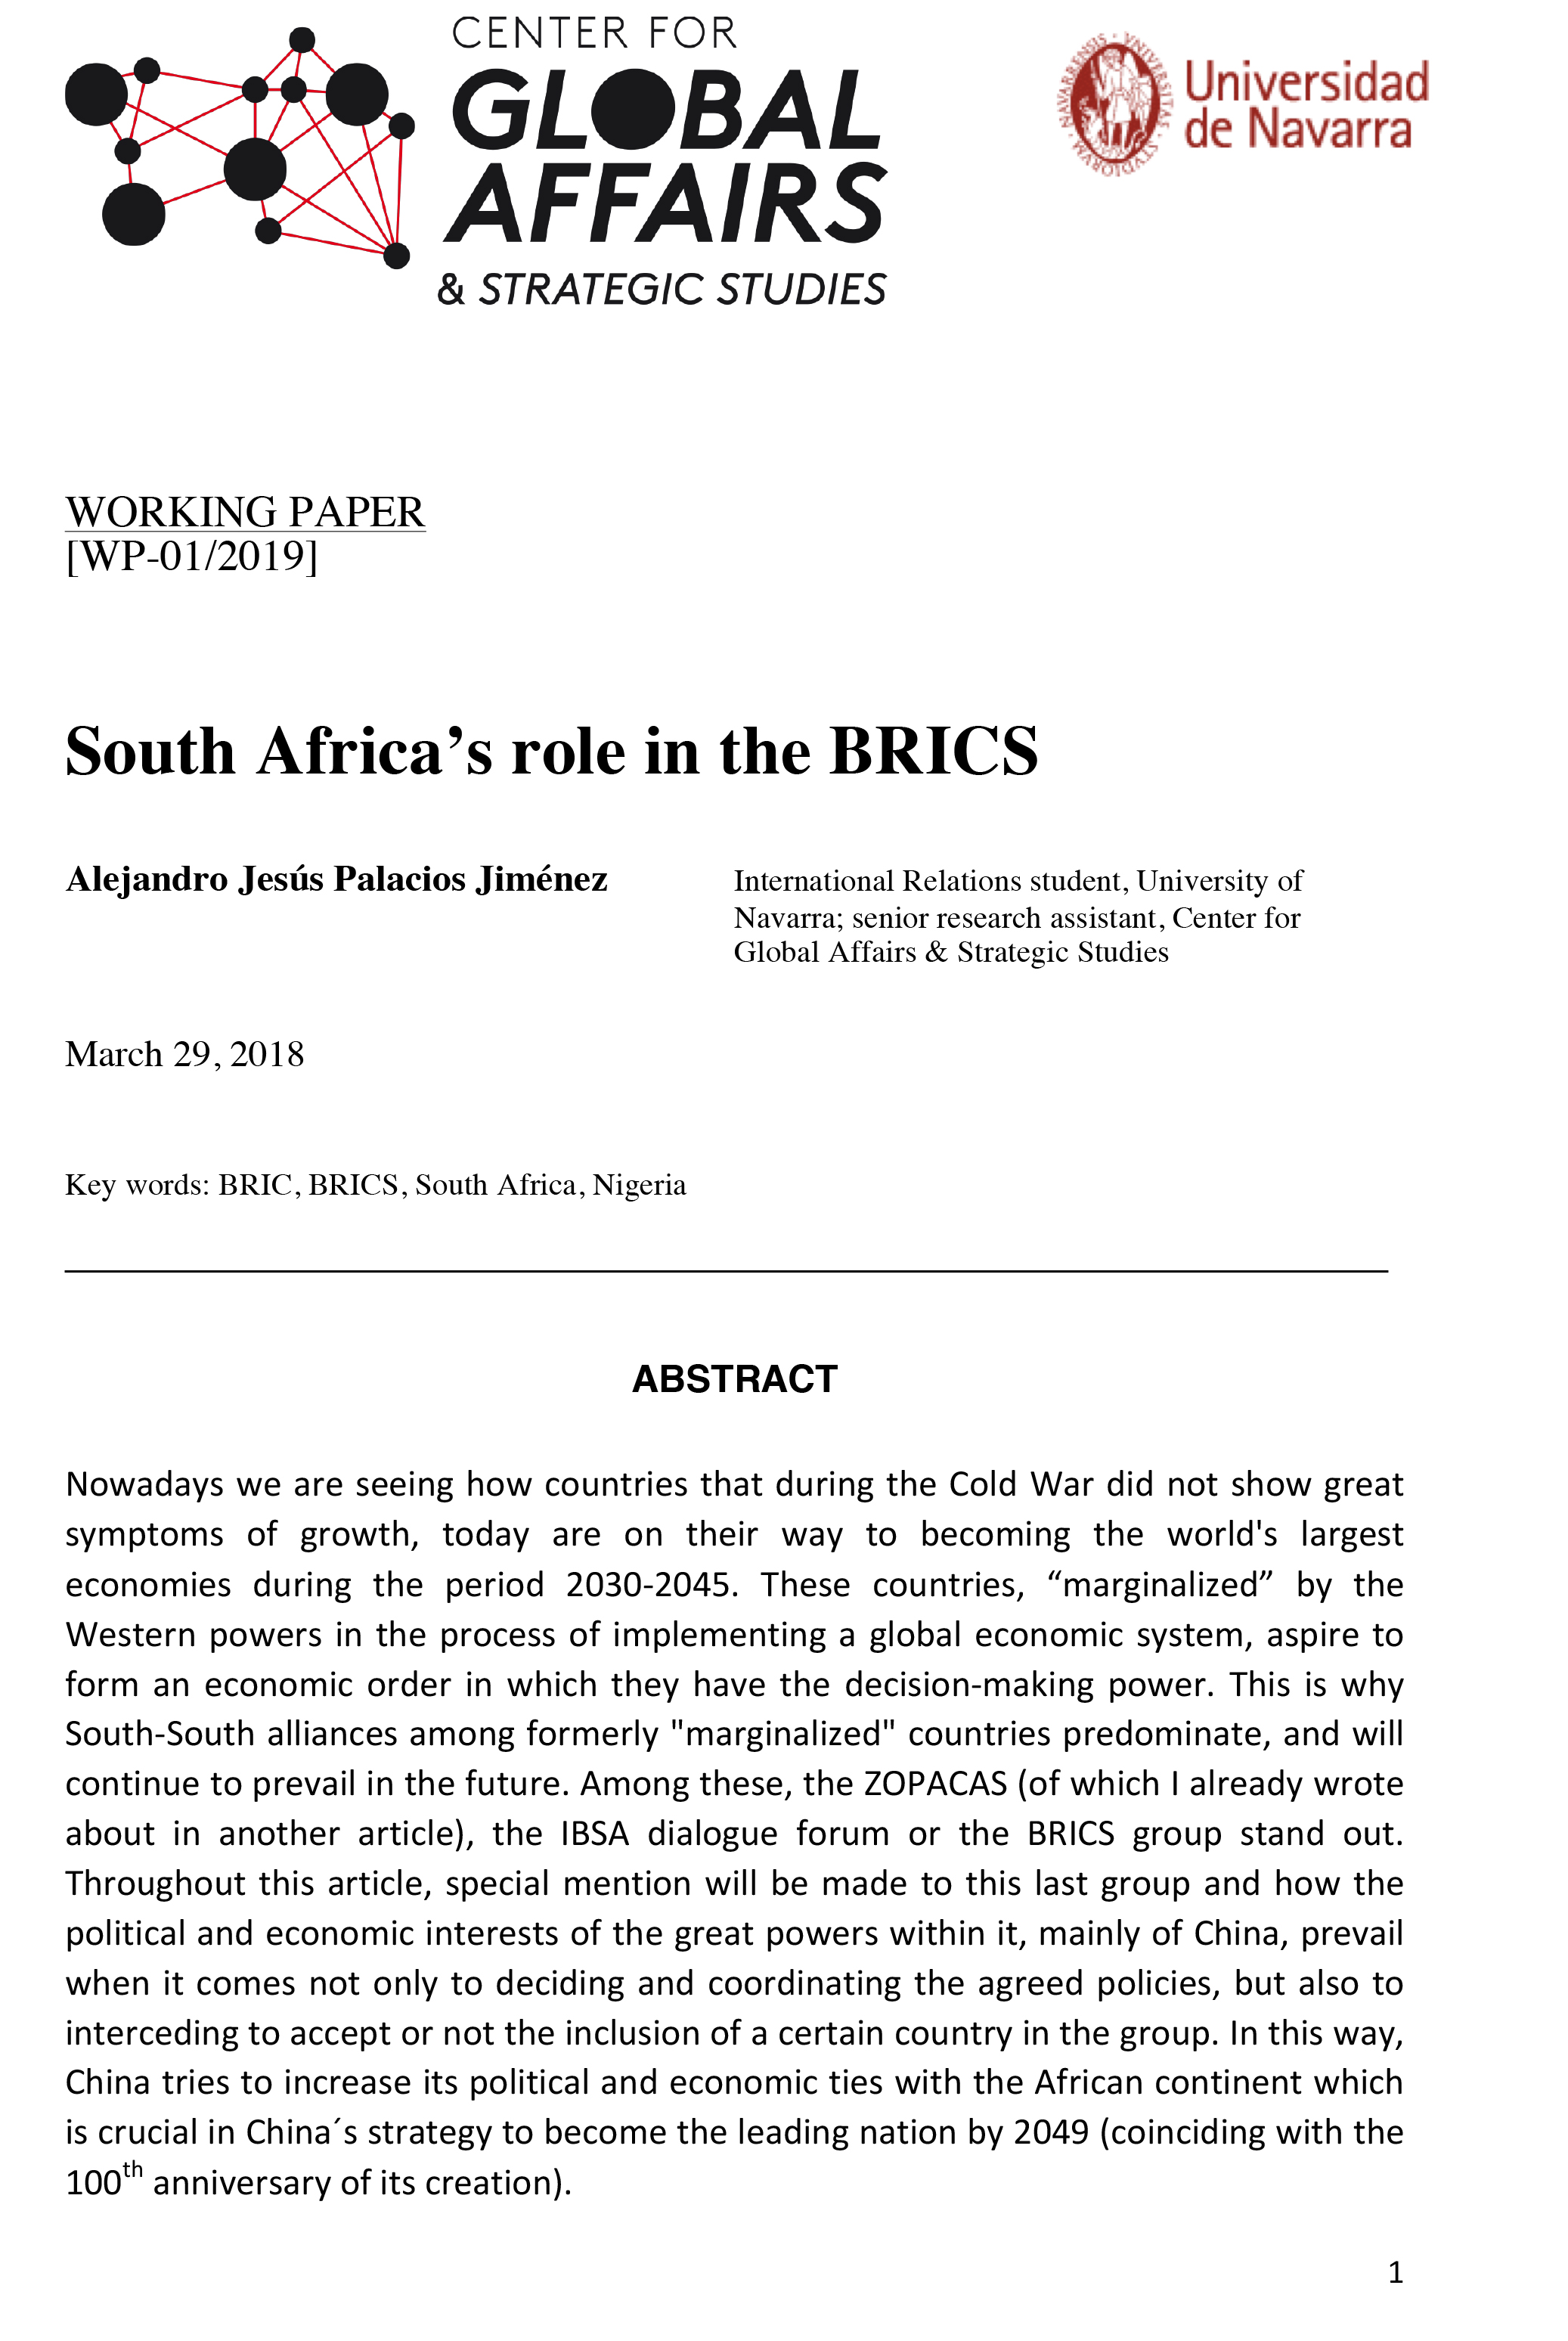 South Africa's role in the BRICS